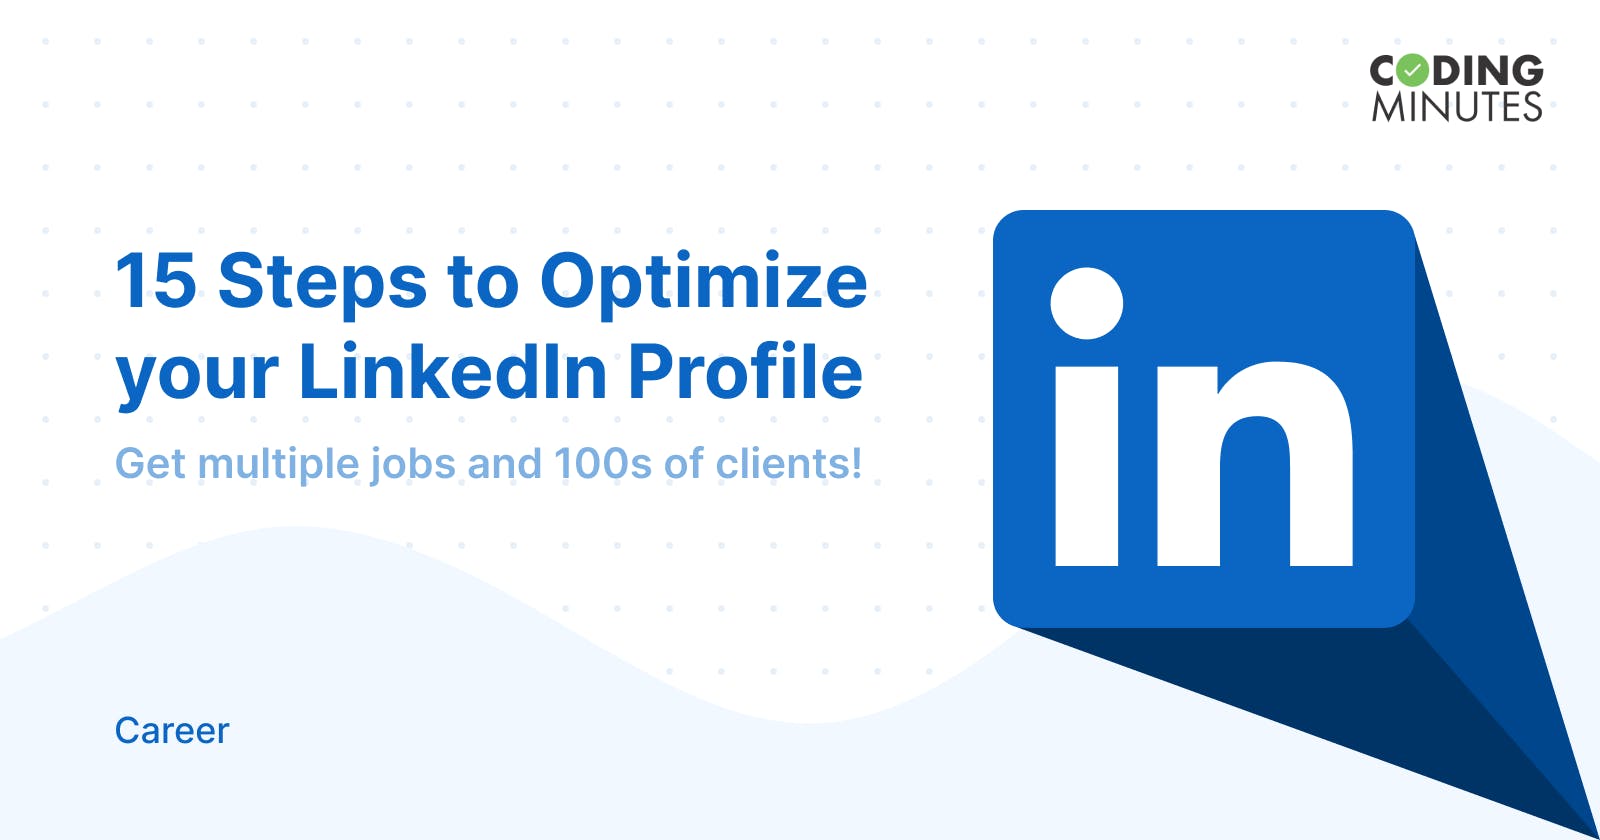 15 Easy Steps to Optimize your LinkedIn Profile for Jobs and Clients